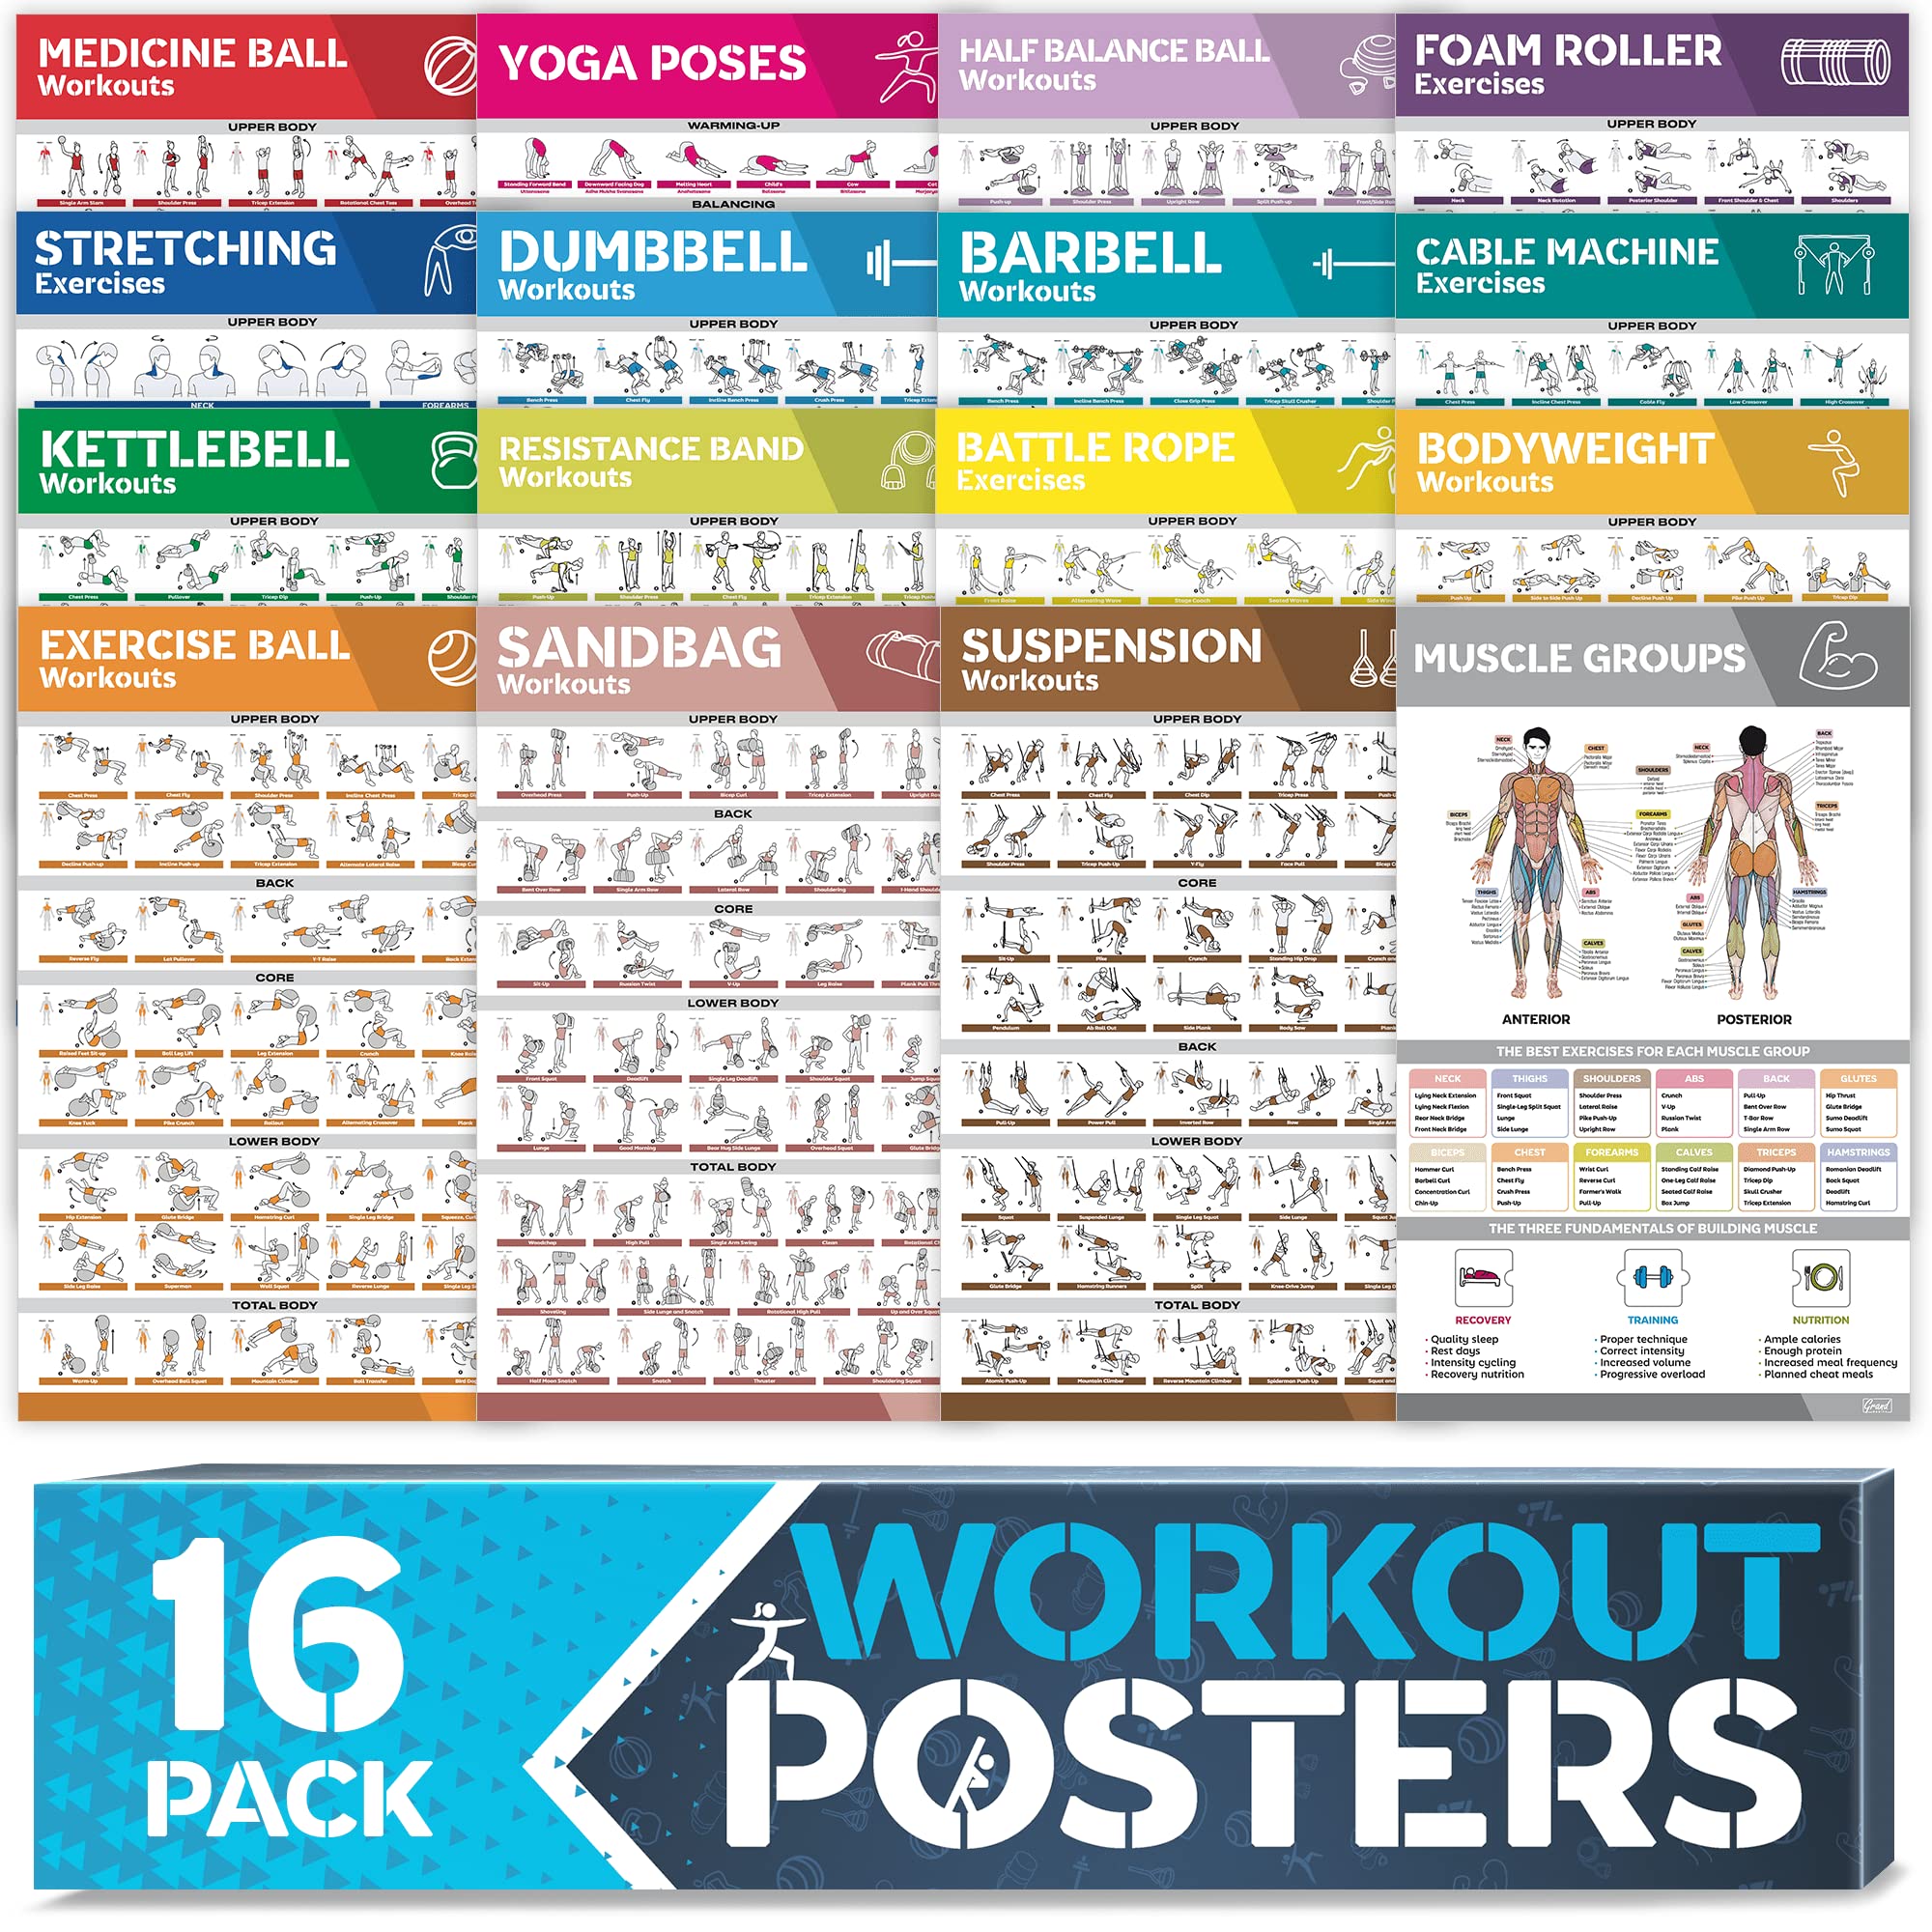 16-PACK Laminated Large Workout Poster Set - Perfect Workout